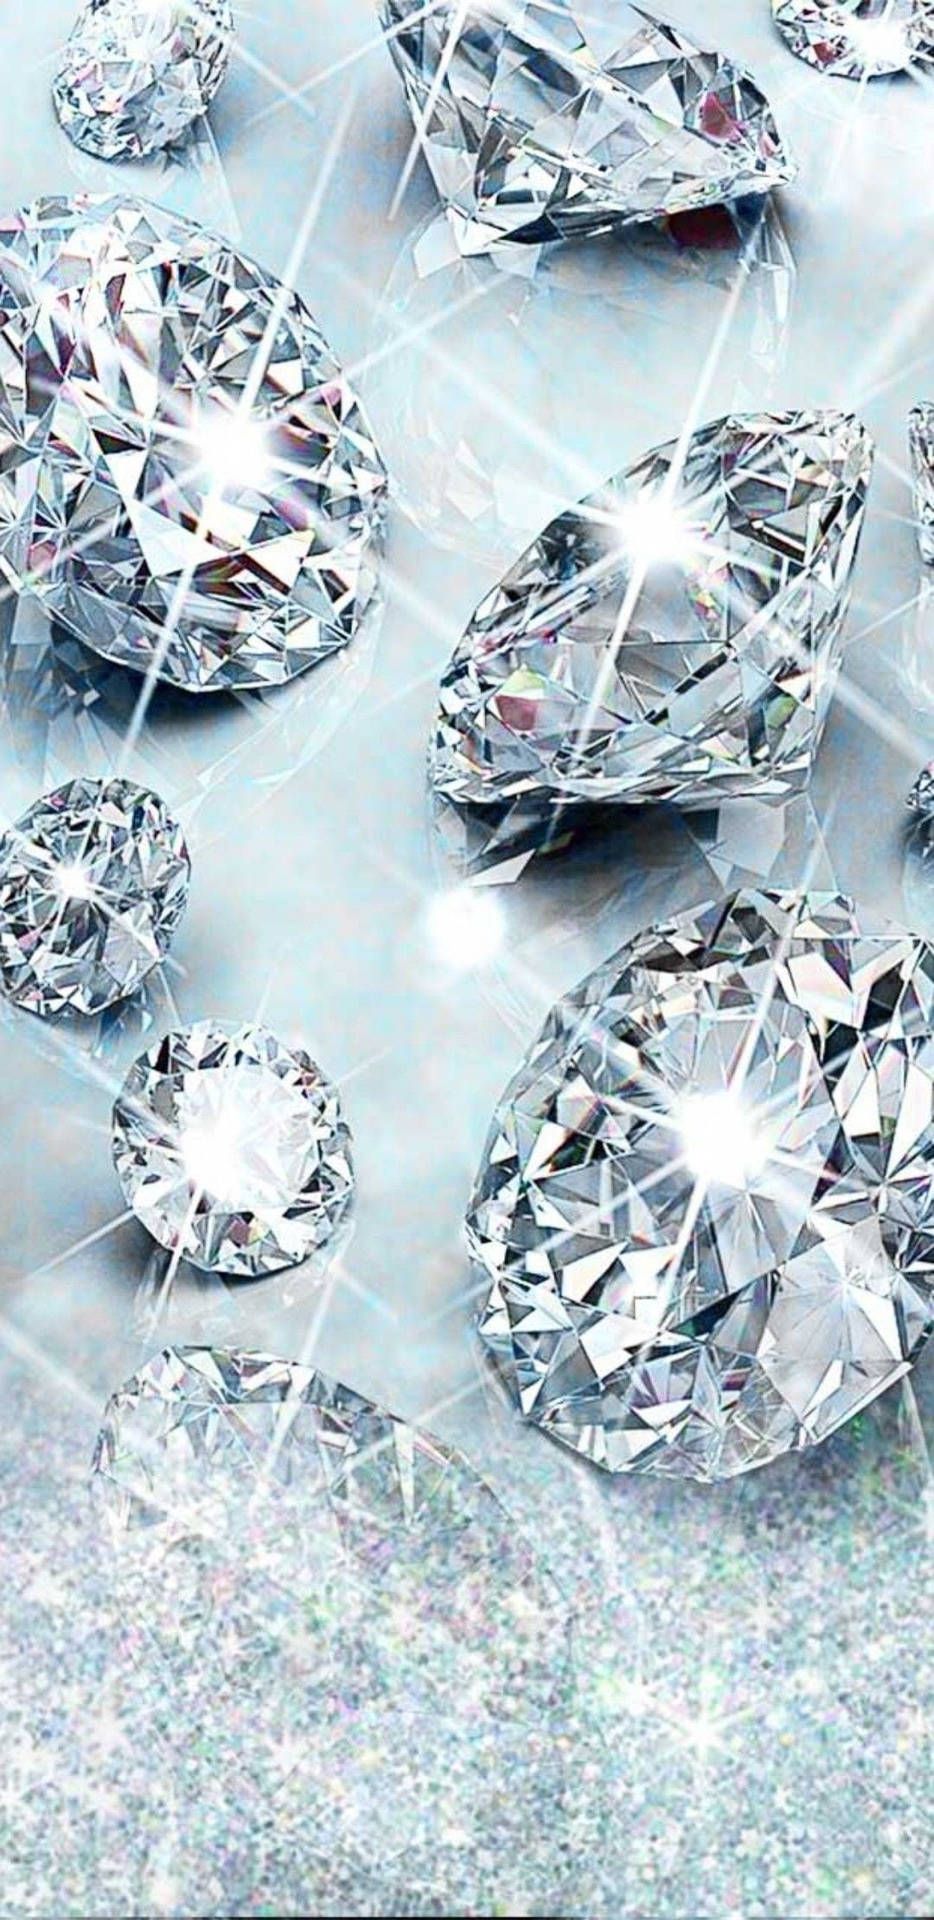 A picture of diamonds on top and bottom - Diamond, bling